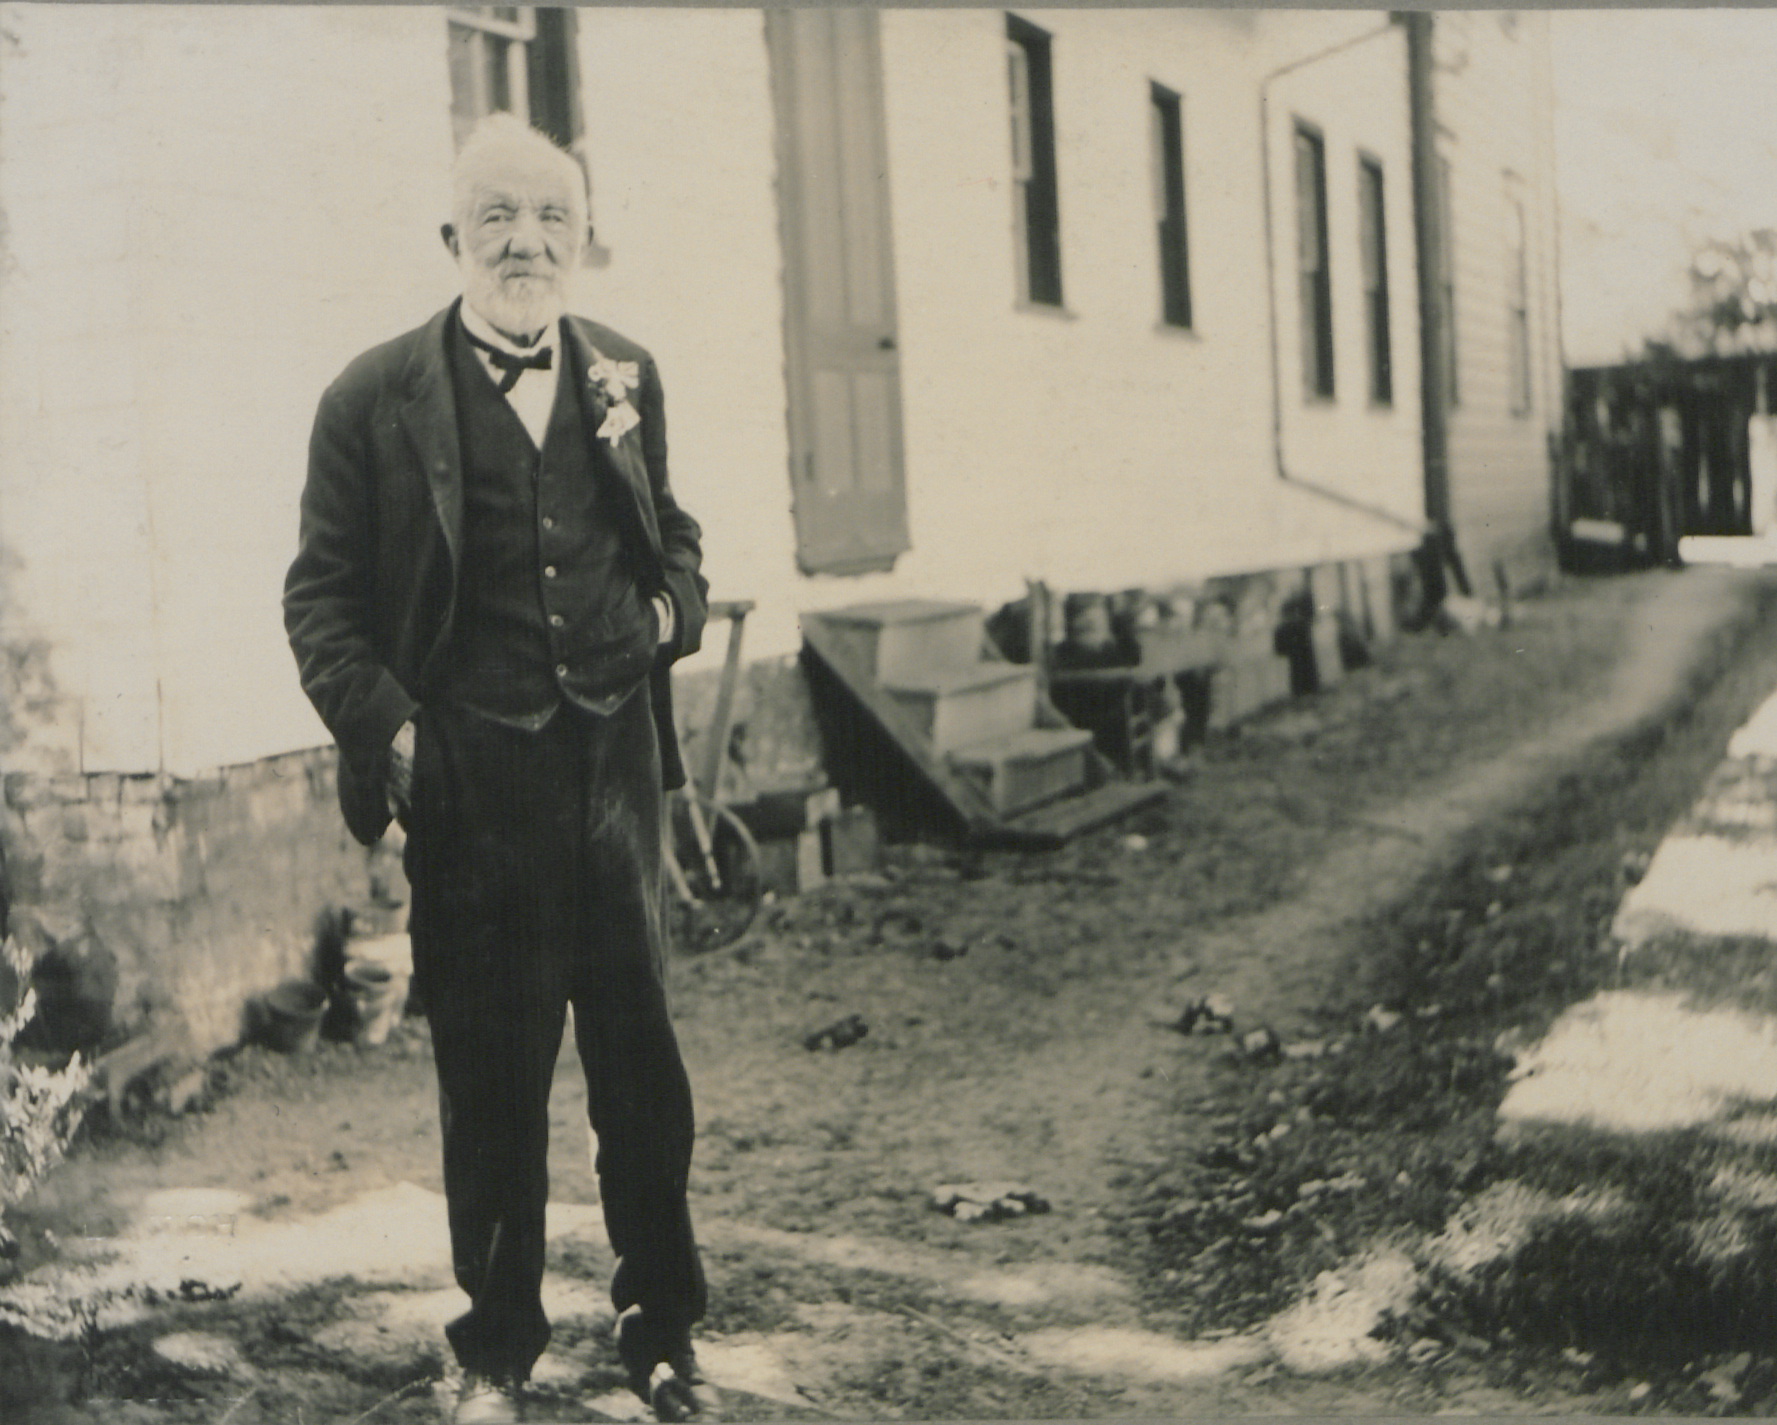 Old man in a suit stands outside a house on a dirt road.